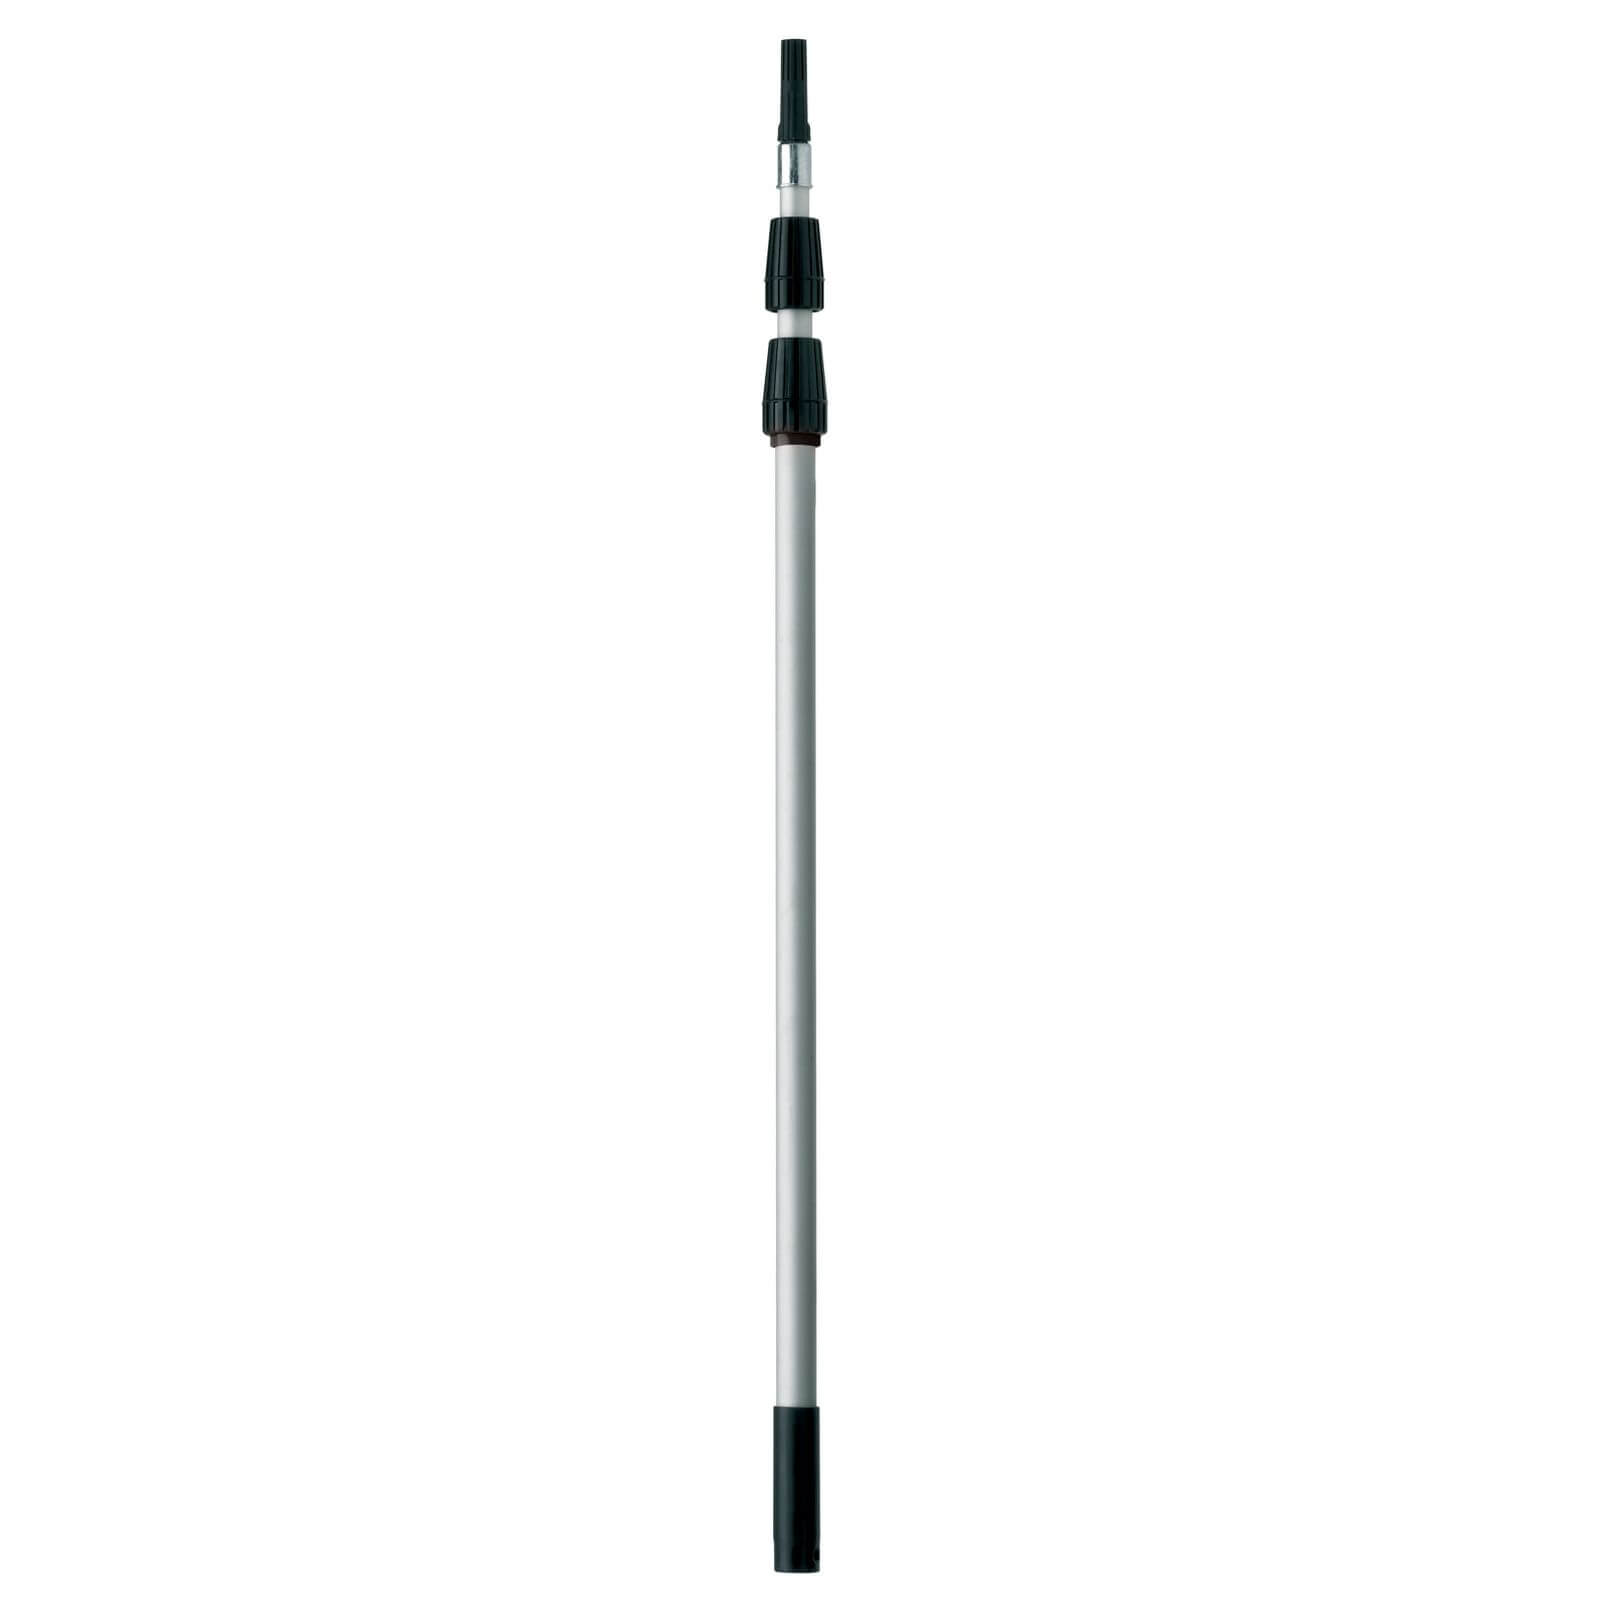 Harris Trademate 3m Extension Pole